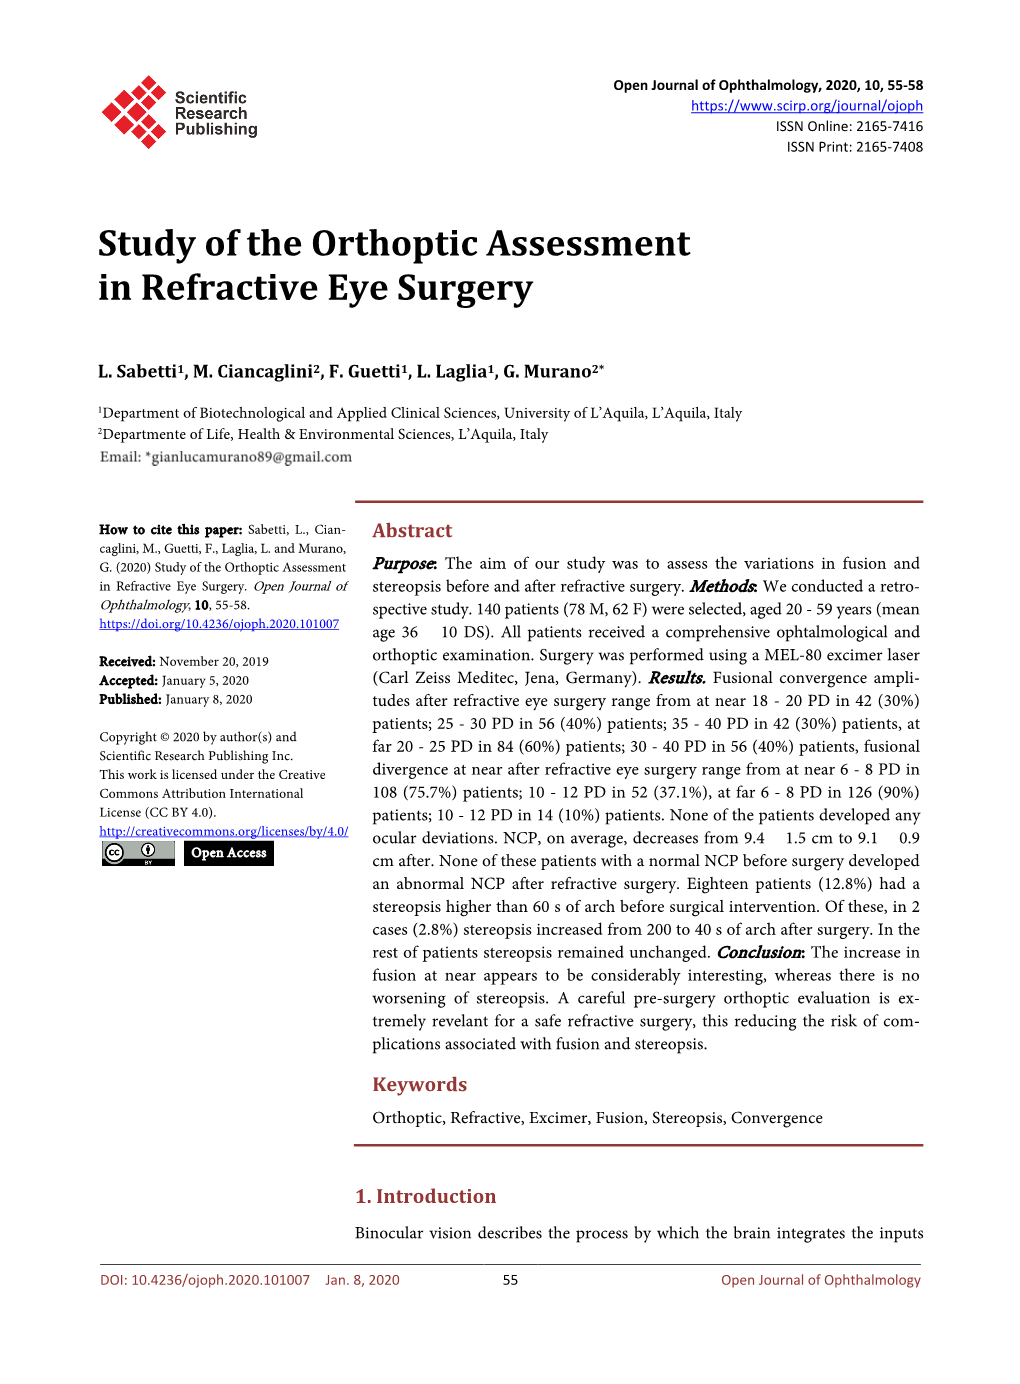 Study of the Orthoptic Assessment in Refractive Eye Surgery